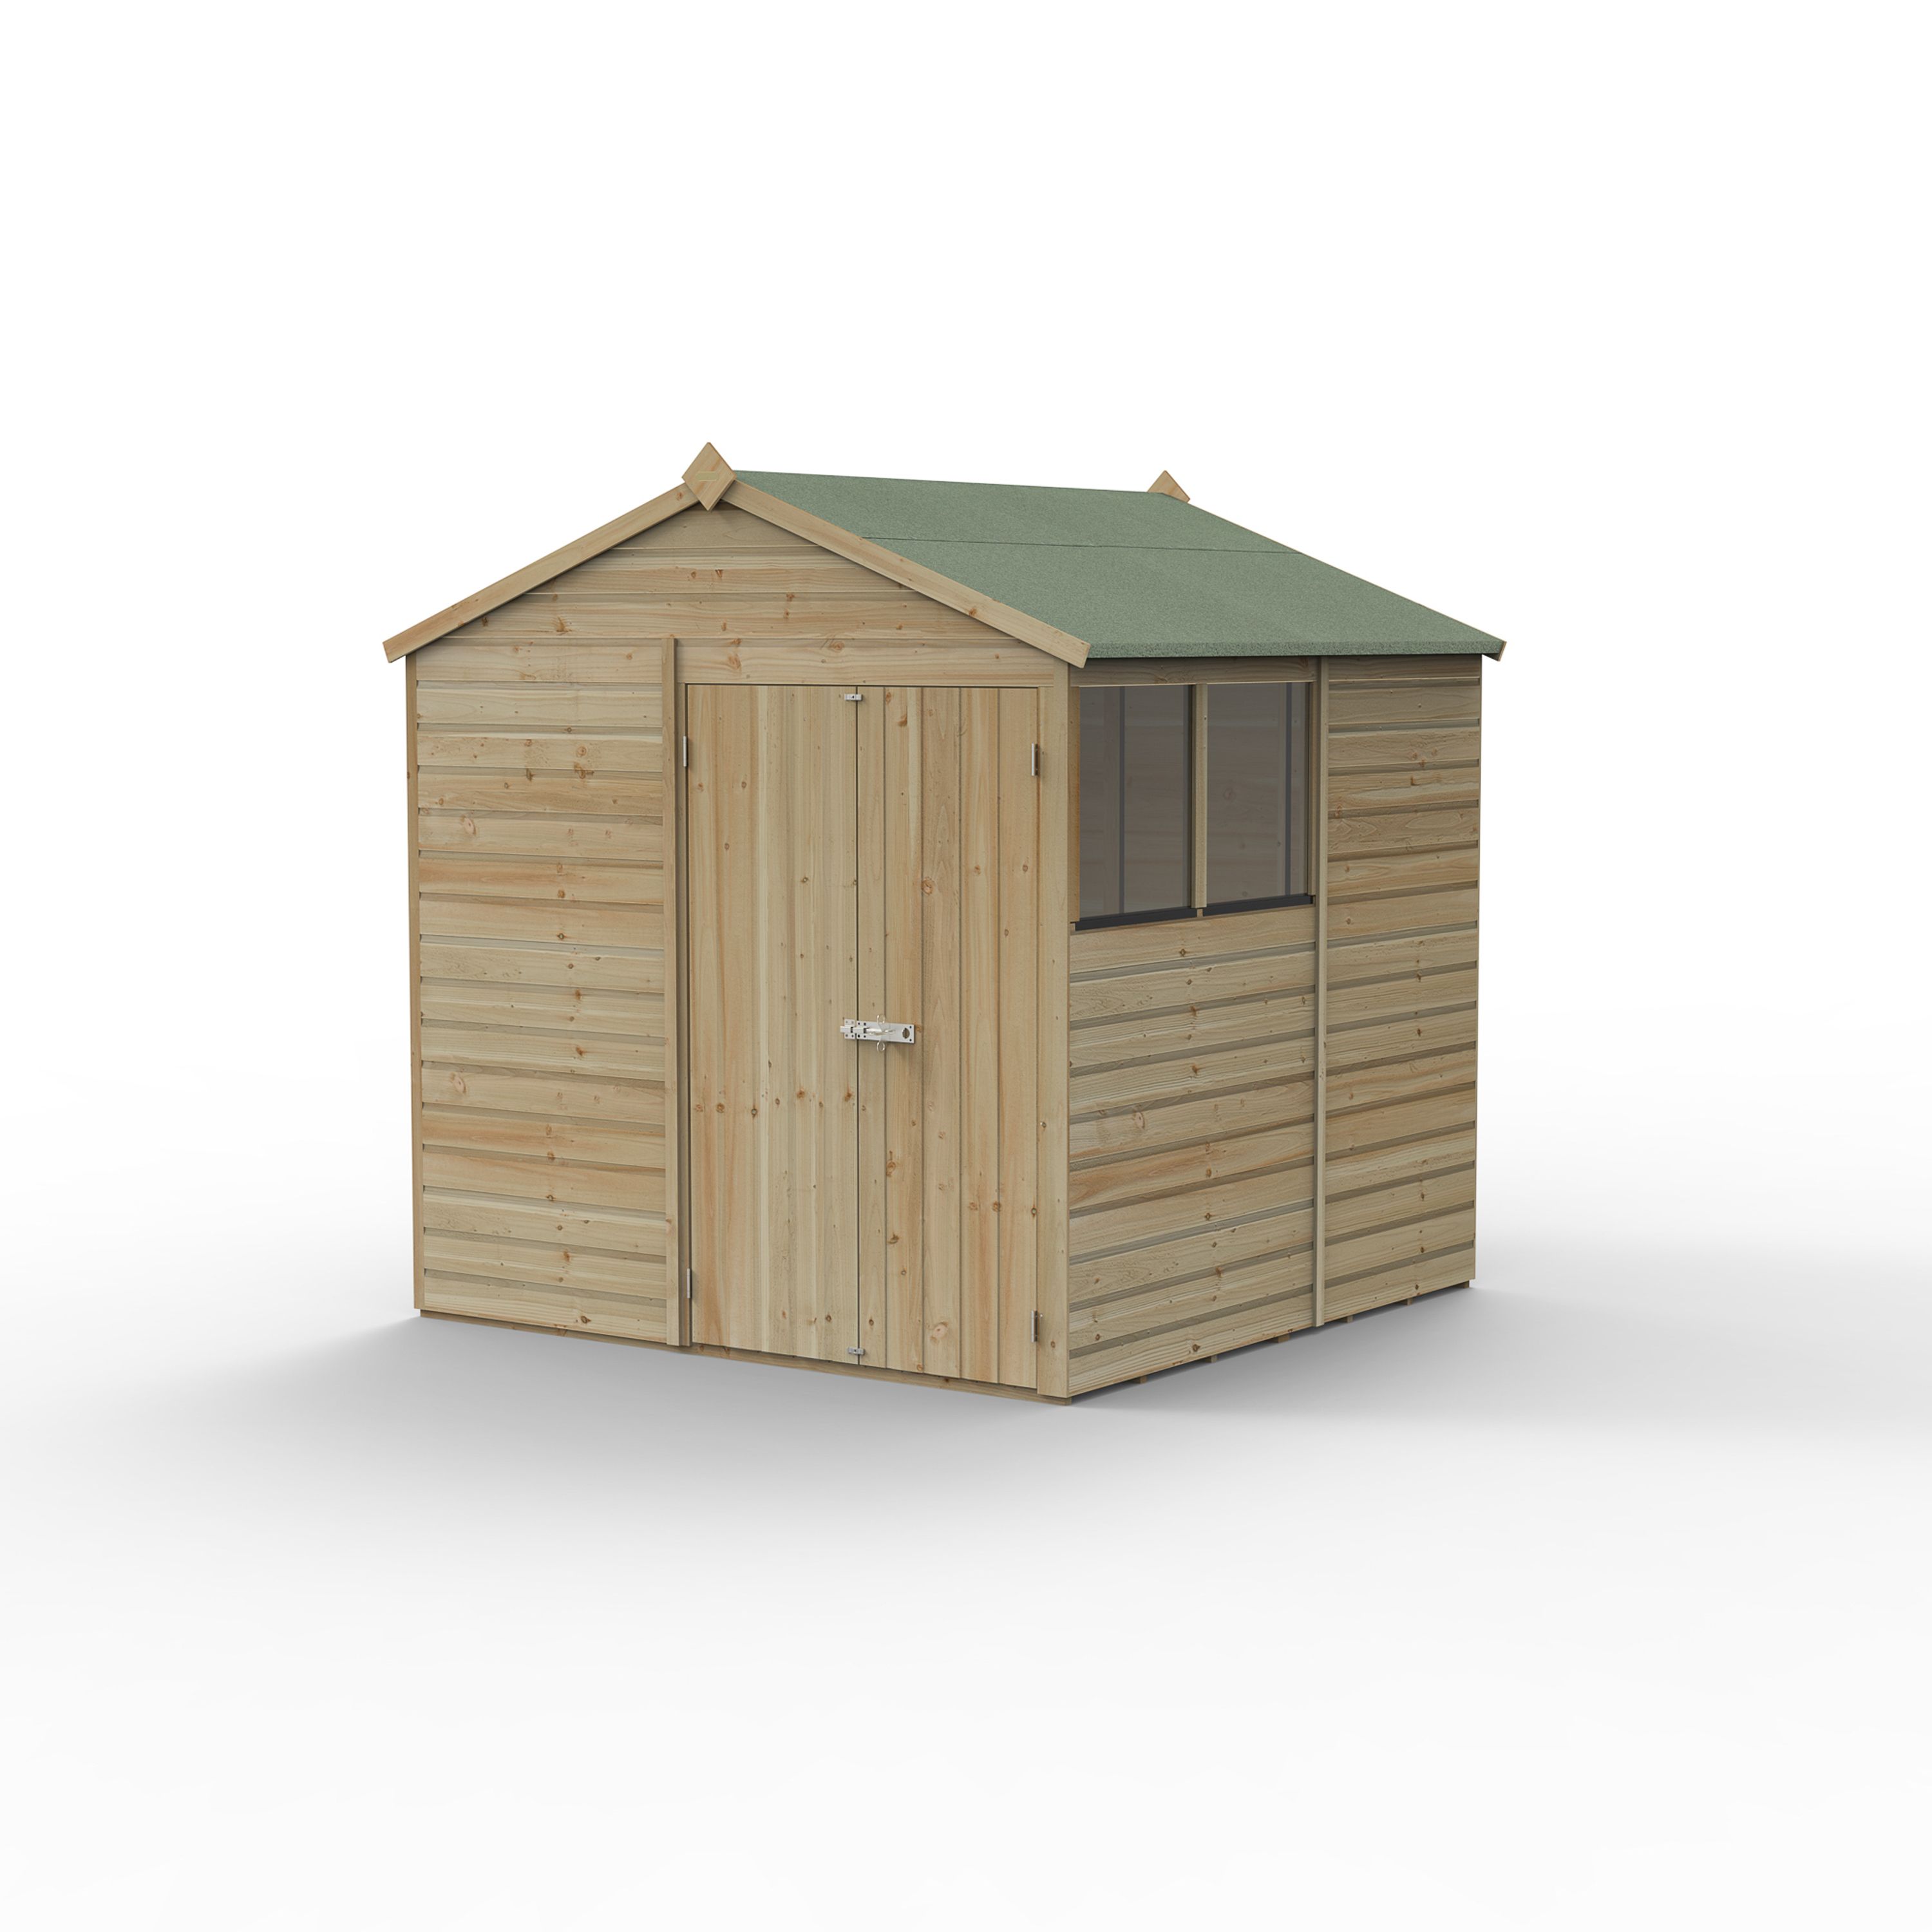 Forest Garden Beckwood 7x7 ft Apex Natural timber Wooden 2 door Shed with floor & 2 windows (Base included)